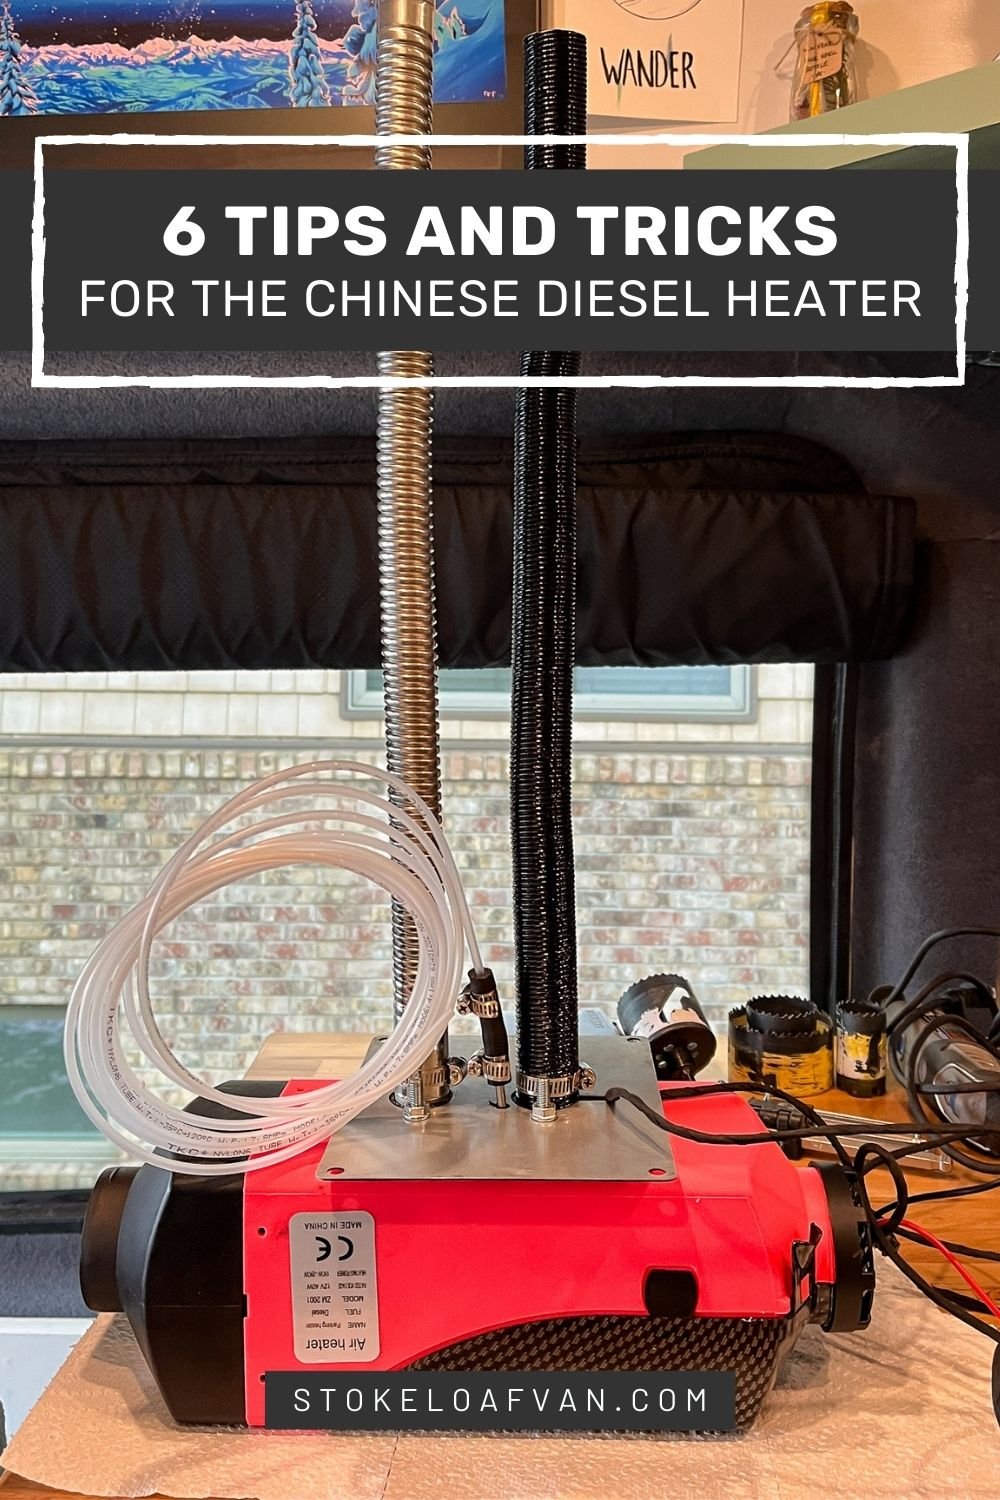 Does Your Car Heater Use Fuel?